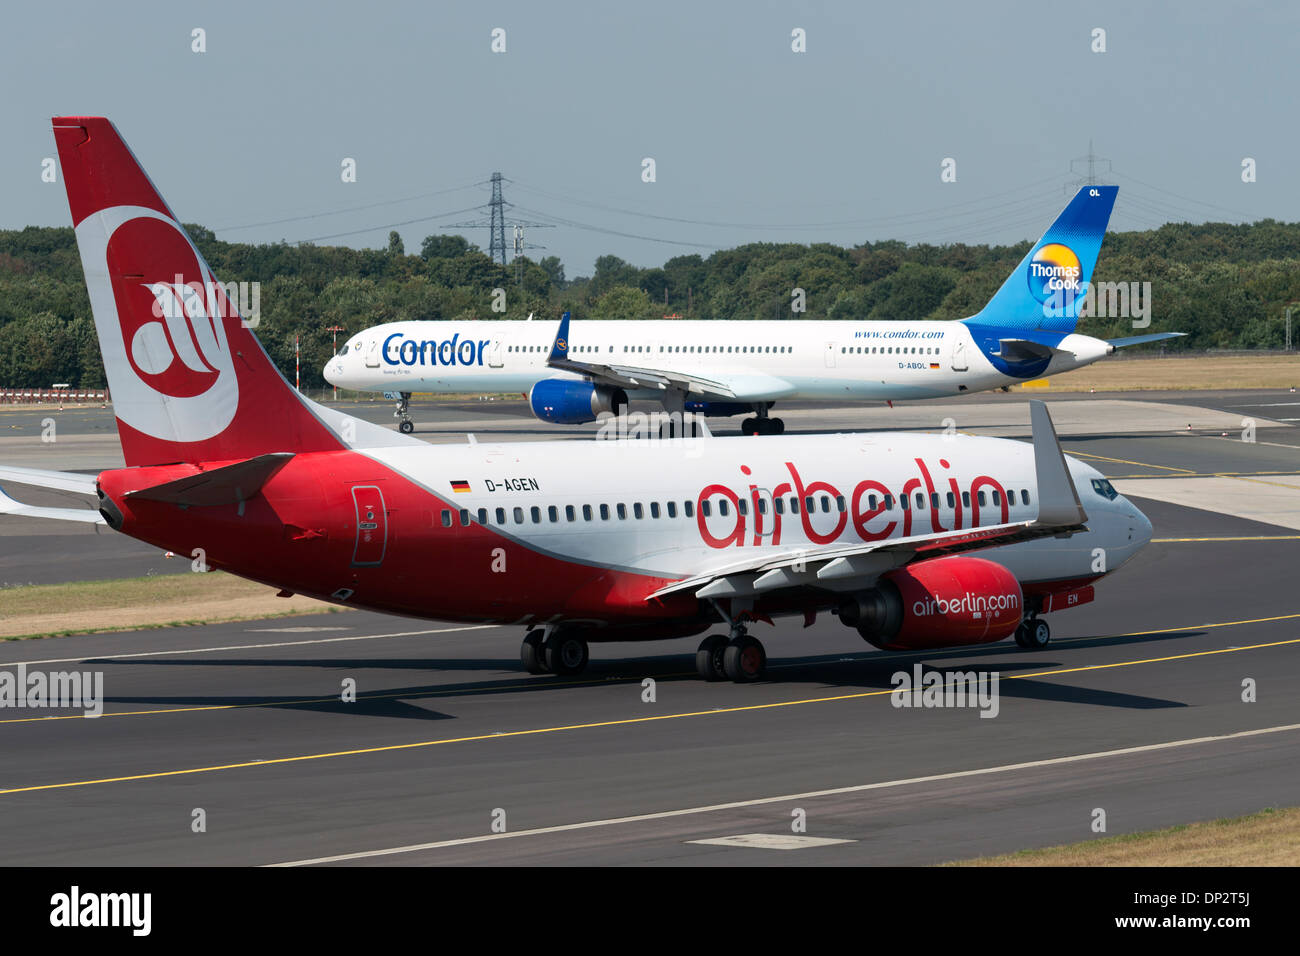 Airliners taxiing to the runway at Dusseldorf International airport, Germany. Stock Photo